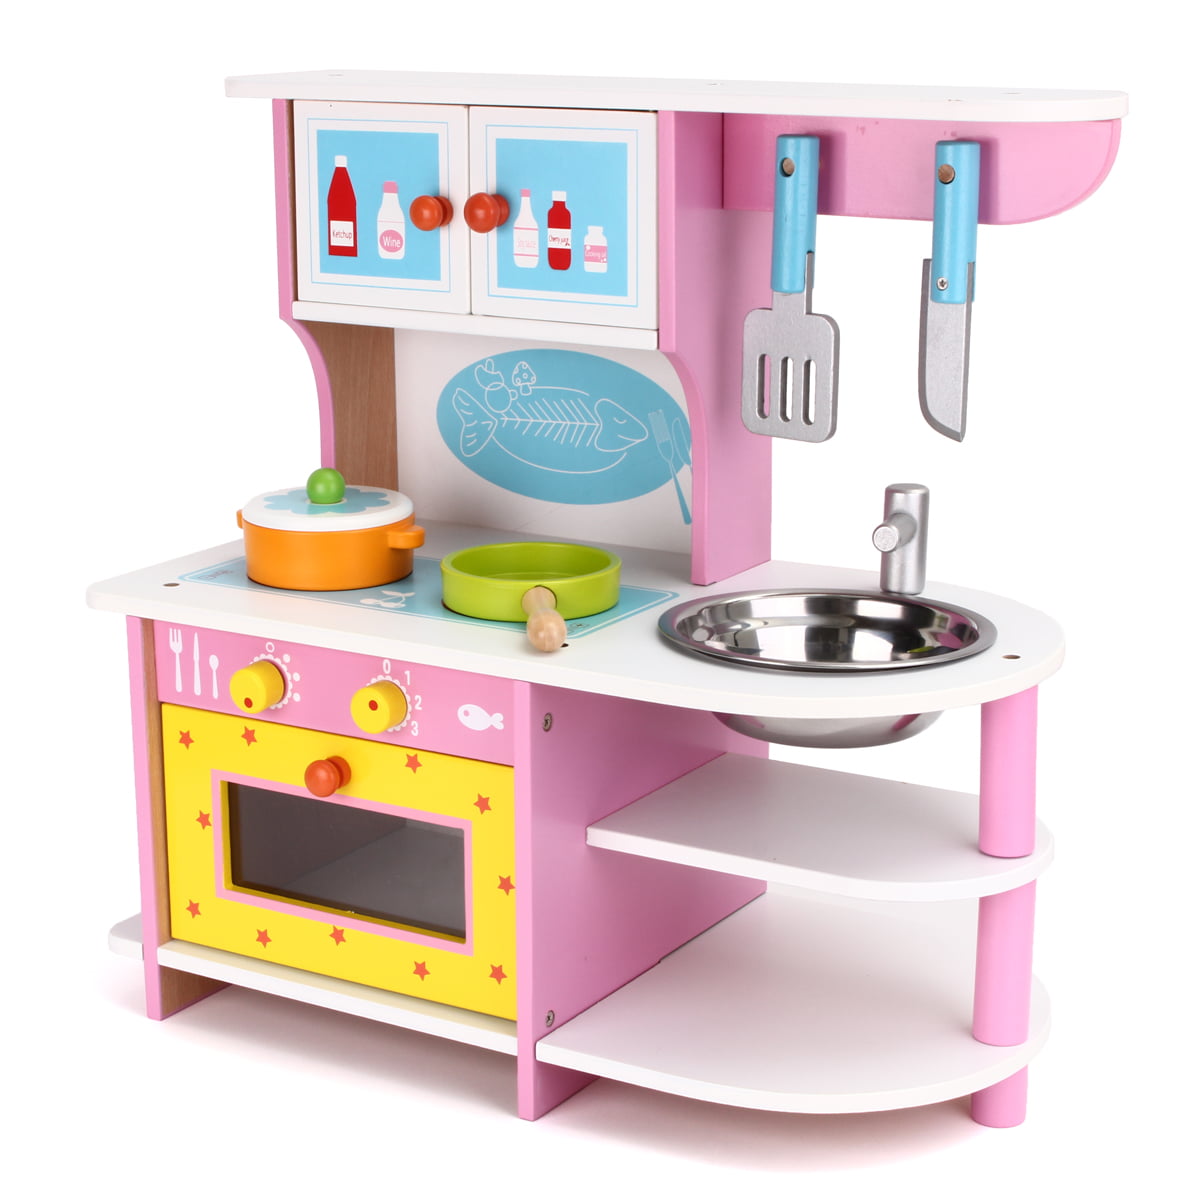 Moaere Wooden Play Kitchen Toy with Wood Kitchen Play Set Accessories